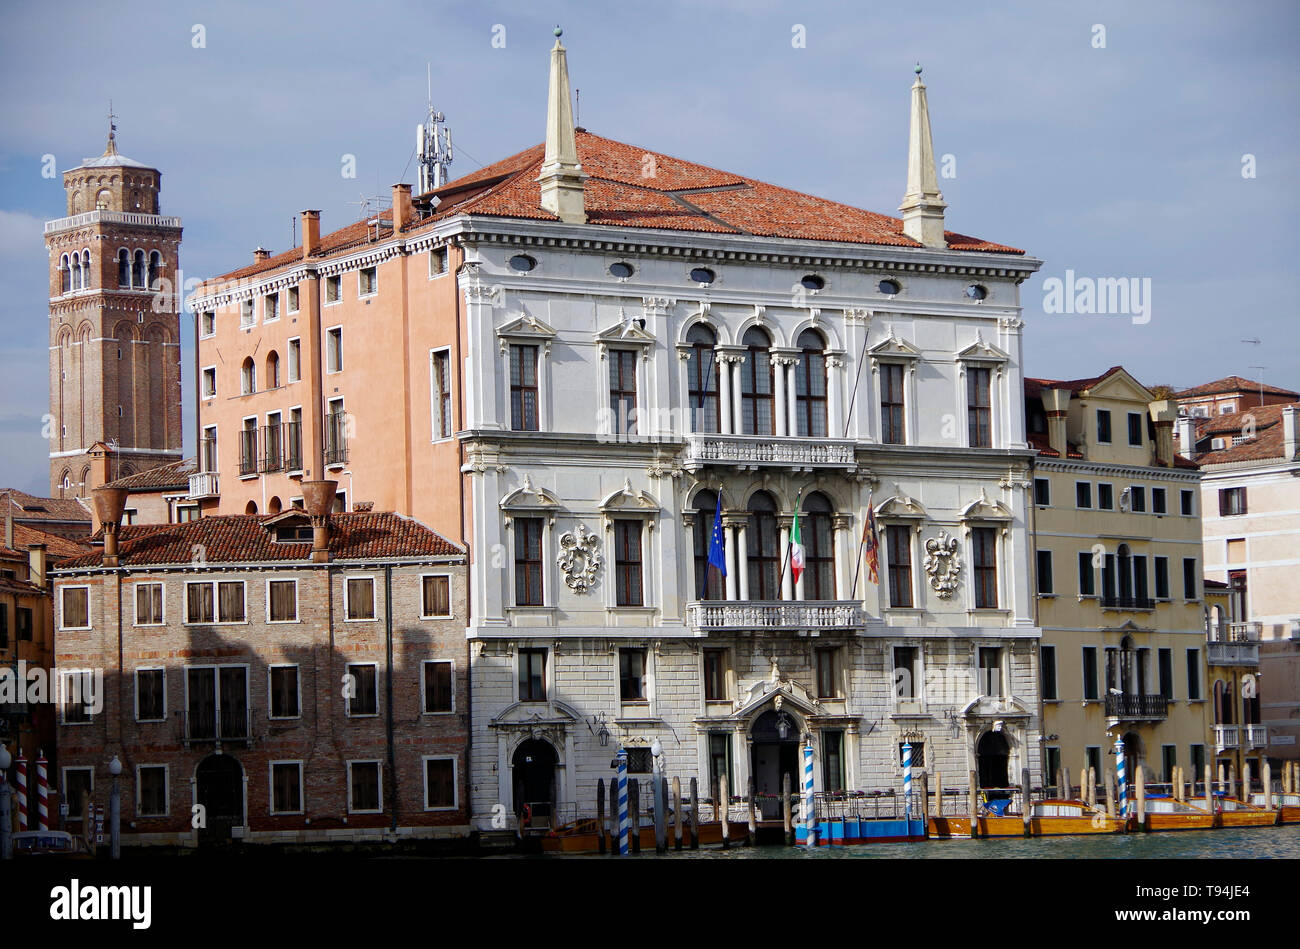 The Palazzo Balbi, a late Sixteenth century palace in Renaissance style with some early Baroque features such as obelisks and broken pediments Stock Photo